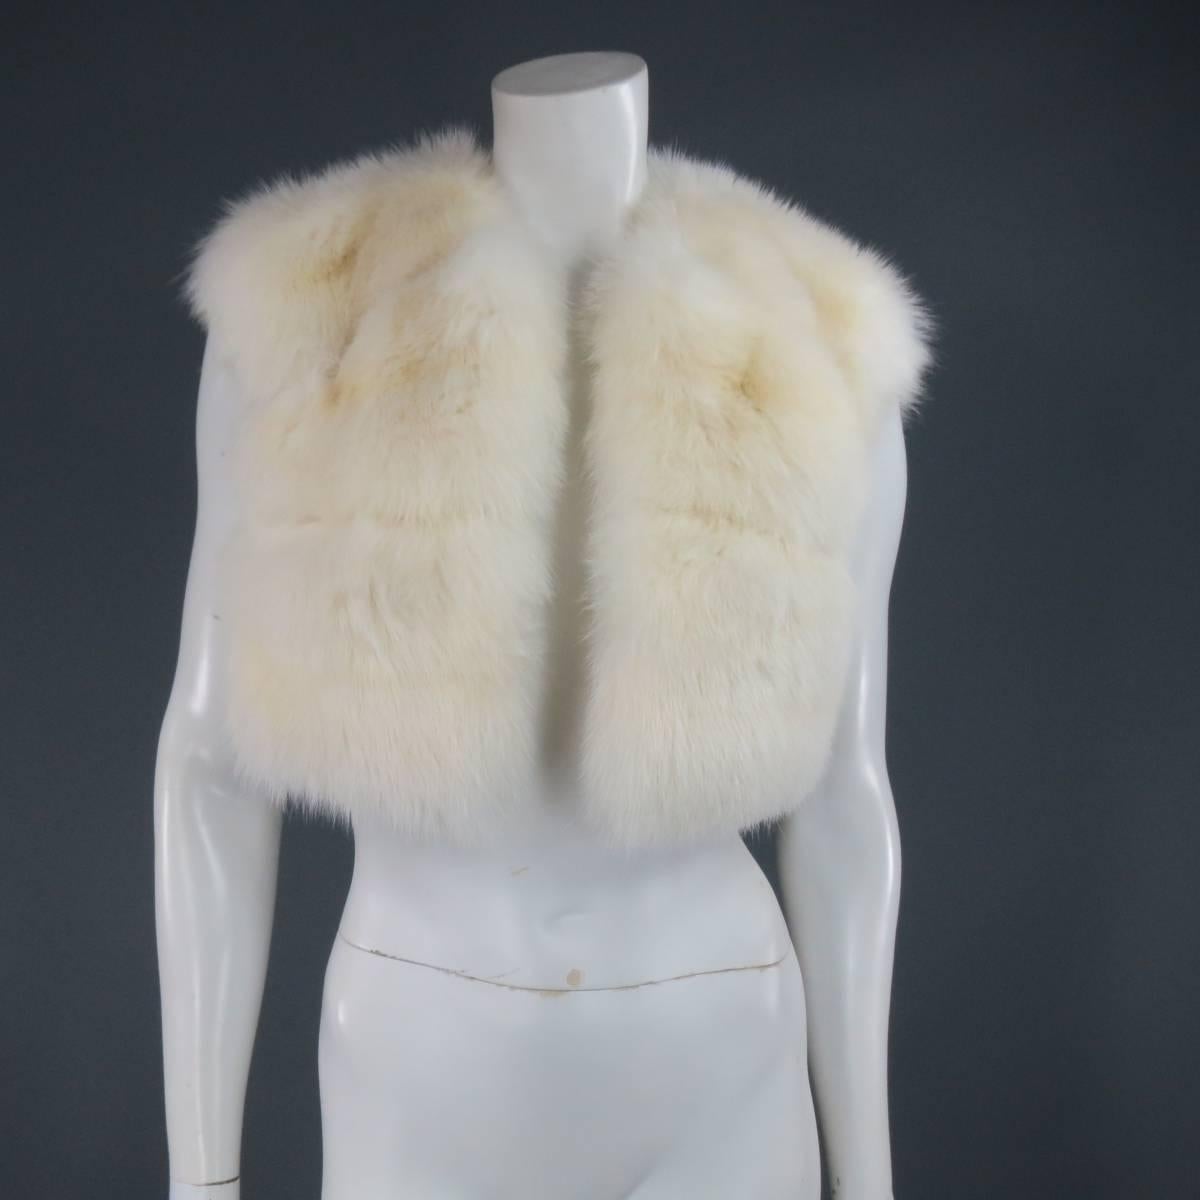 Classic cropped vest by DENISS BASSO in creamy, off white, soft sable fur with a high, round neck, open front, and silk lining. Made in USA.
 
Excellent Pre-Owned Condition.
 
Measurements:
 
Shoulder: 16 in.
Bust: 36 in.
Length: 17 in.